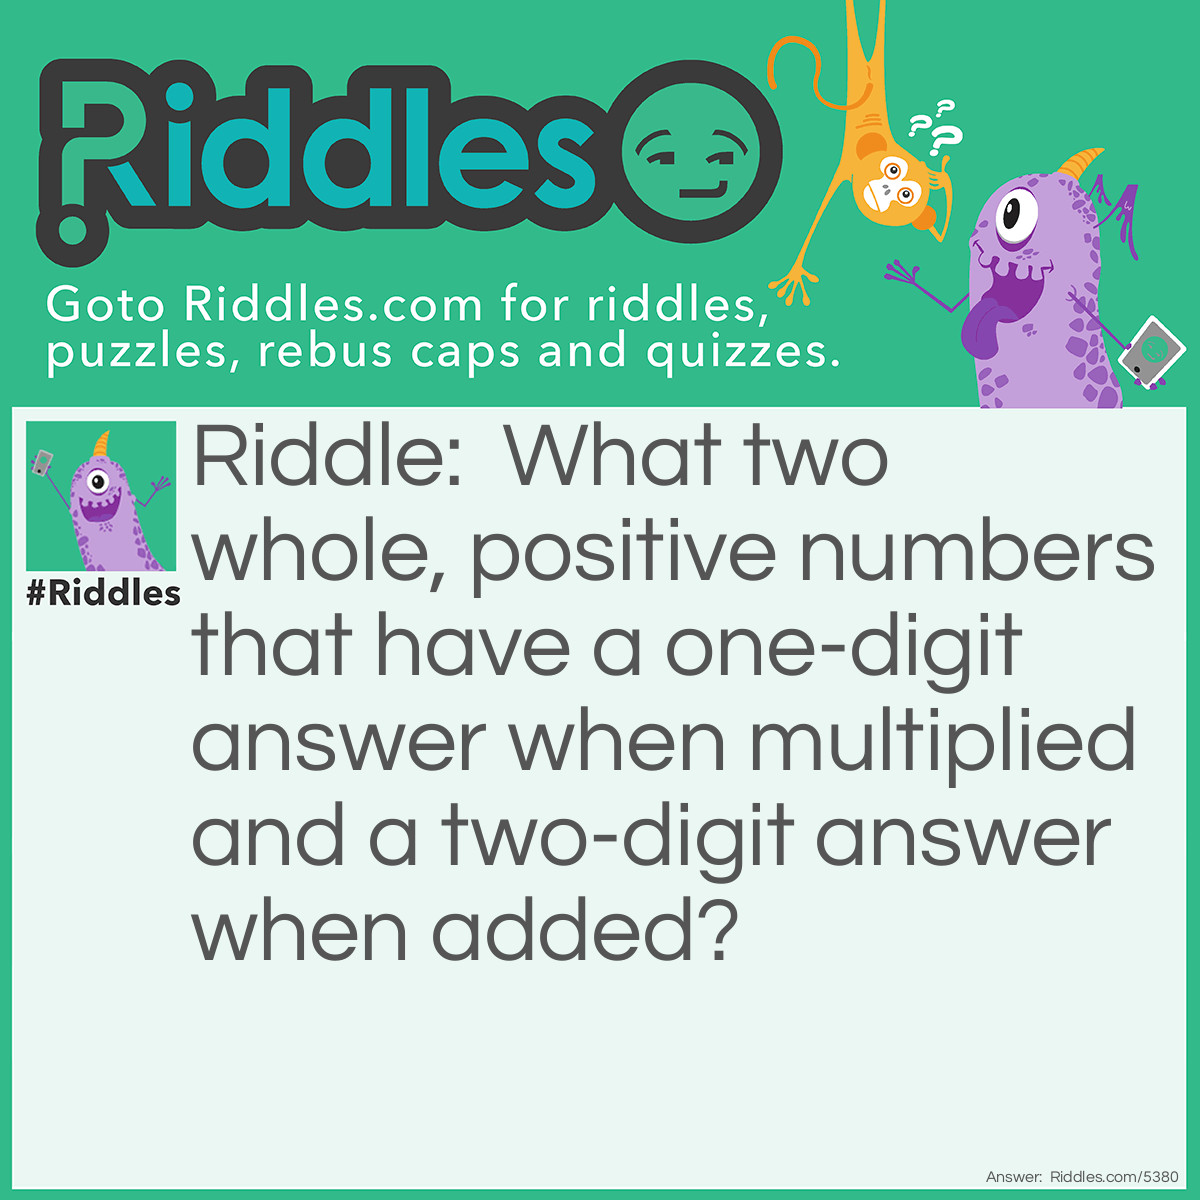 Riddle: What two whole, positive numbers have a one-digit answer when multiplied and a two-digit answer when added? Answer: 1 and 9.